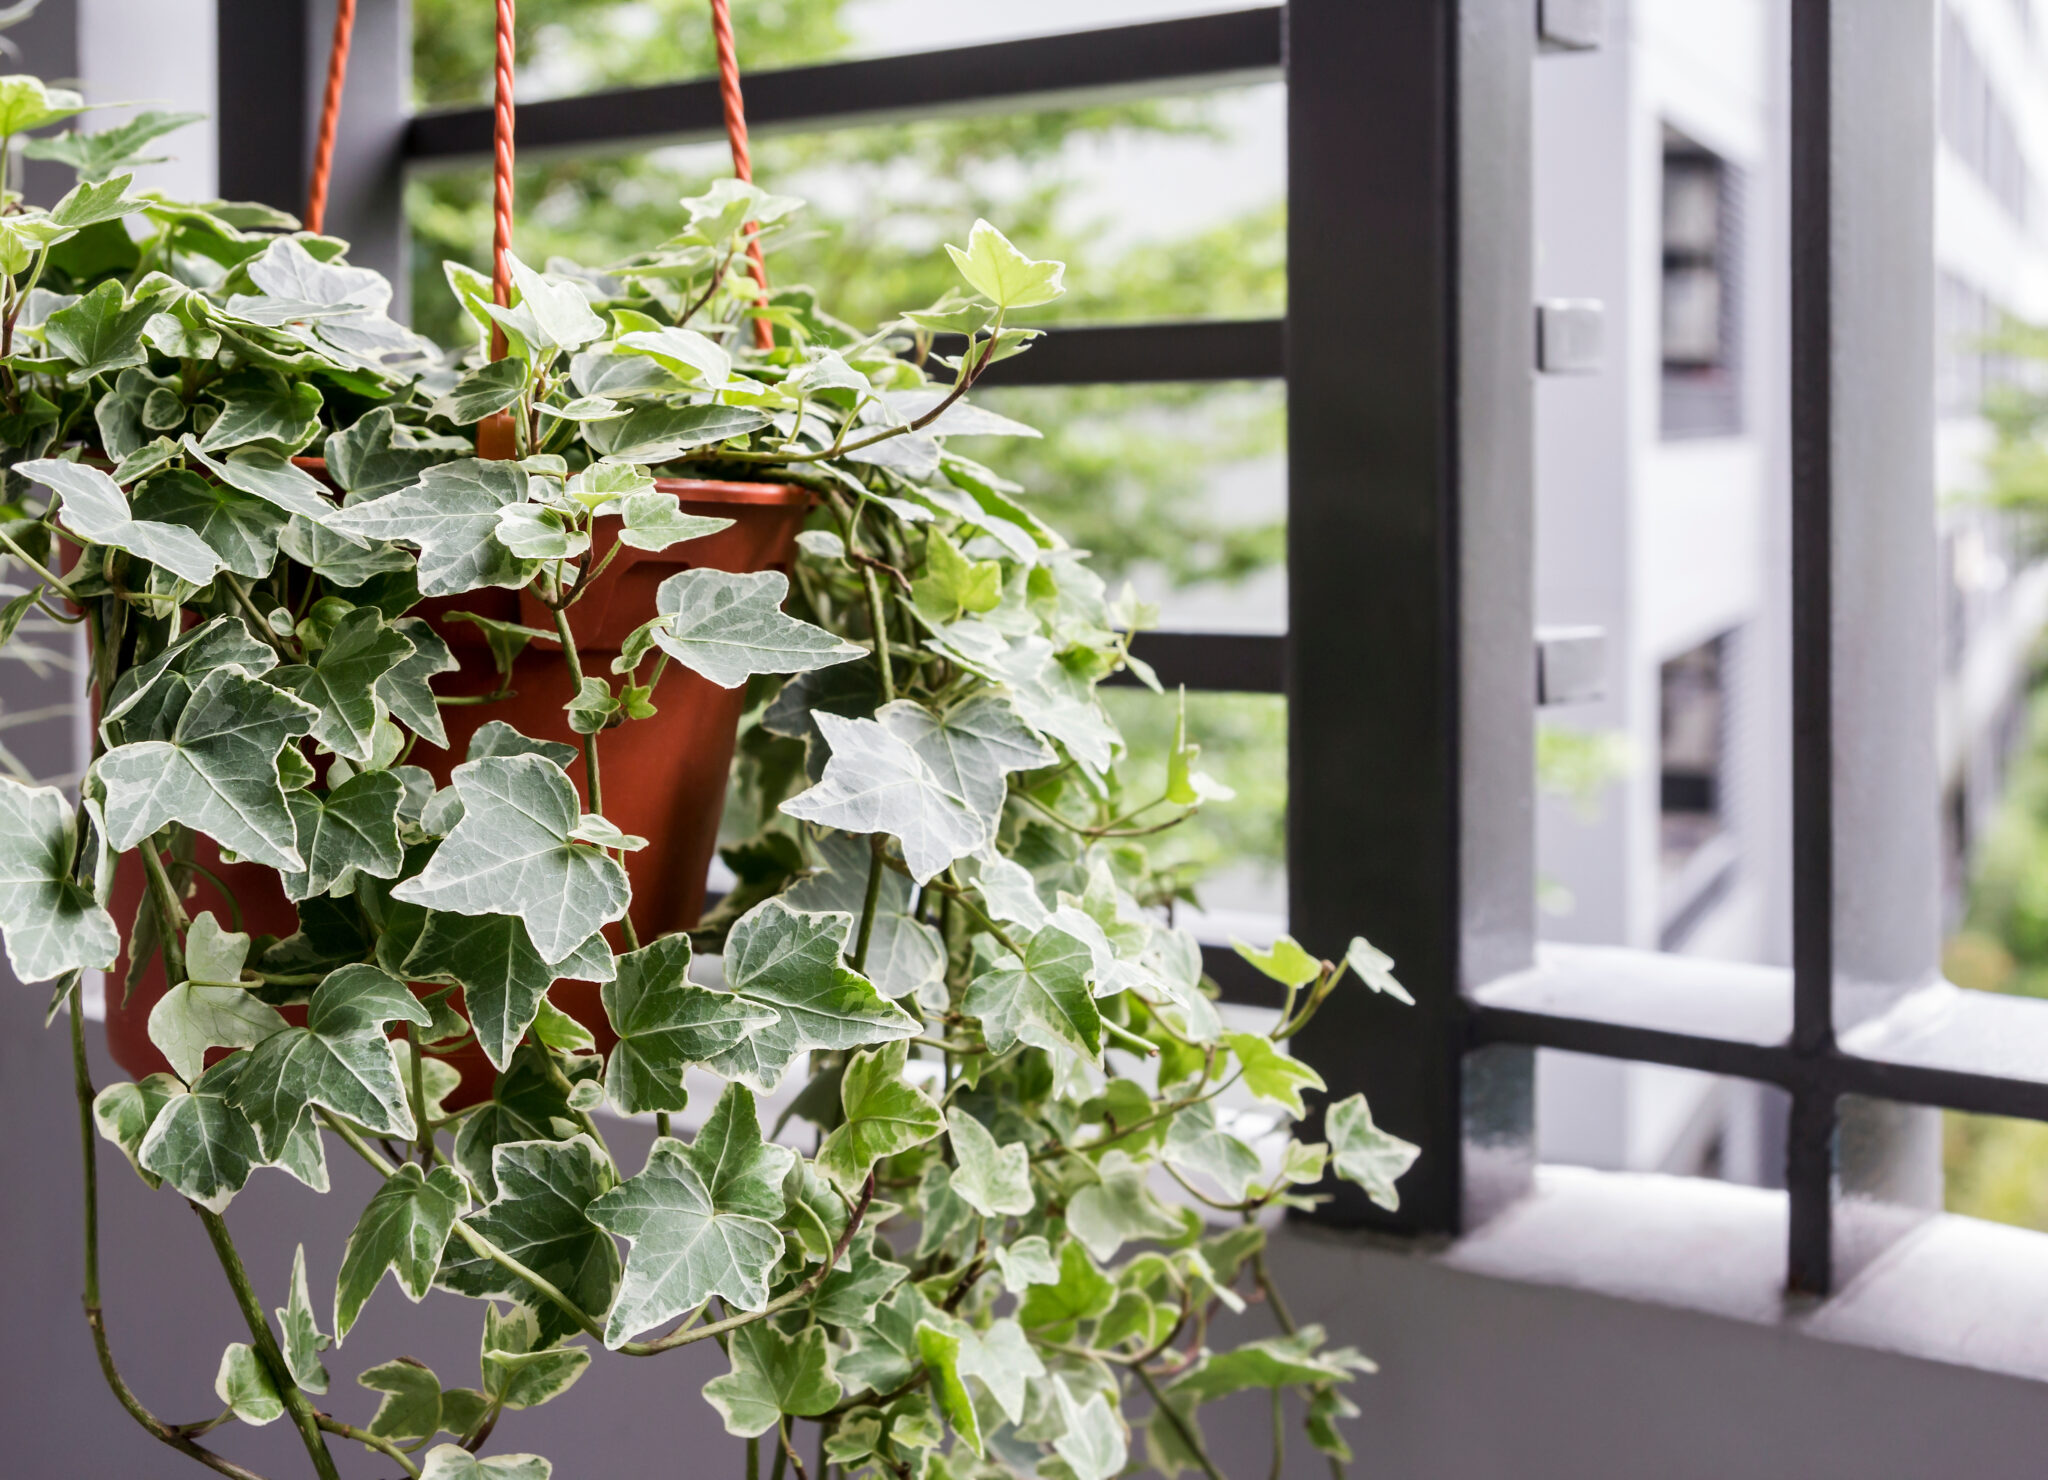 12 Houseplants That Are Almost Impossible to Kill, According To A Plant Expert